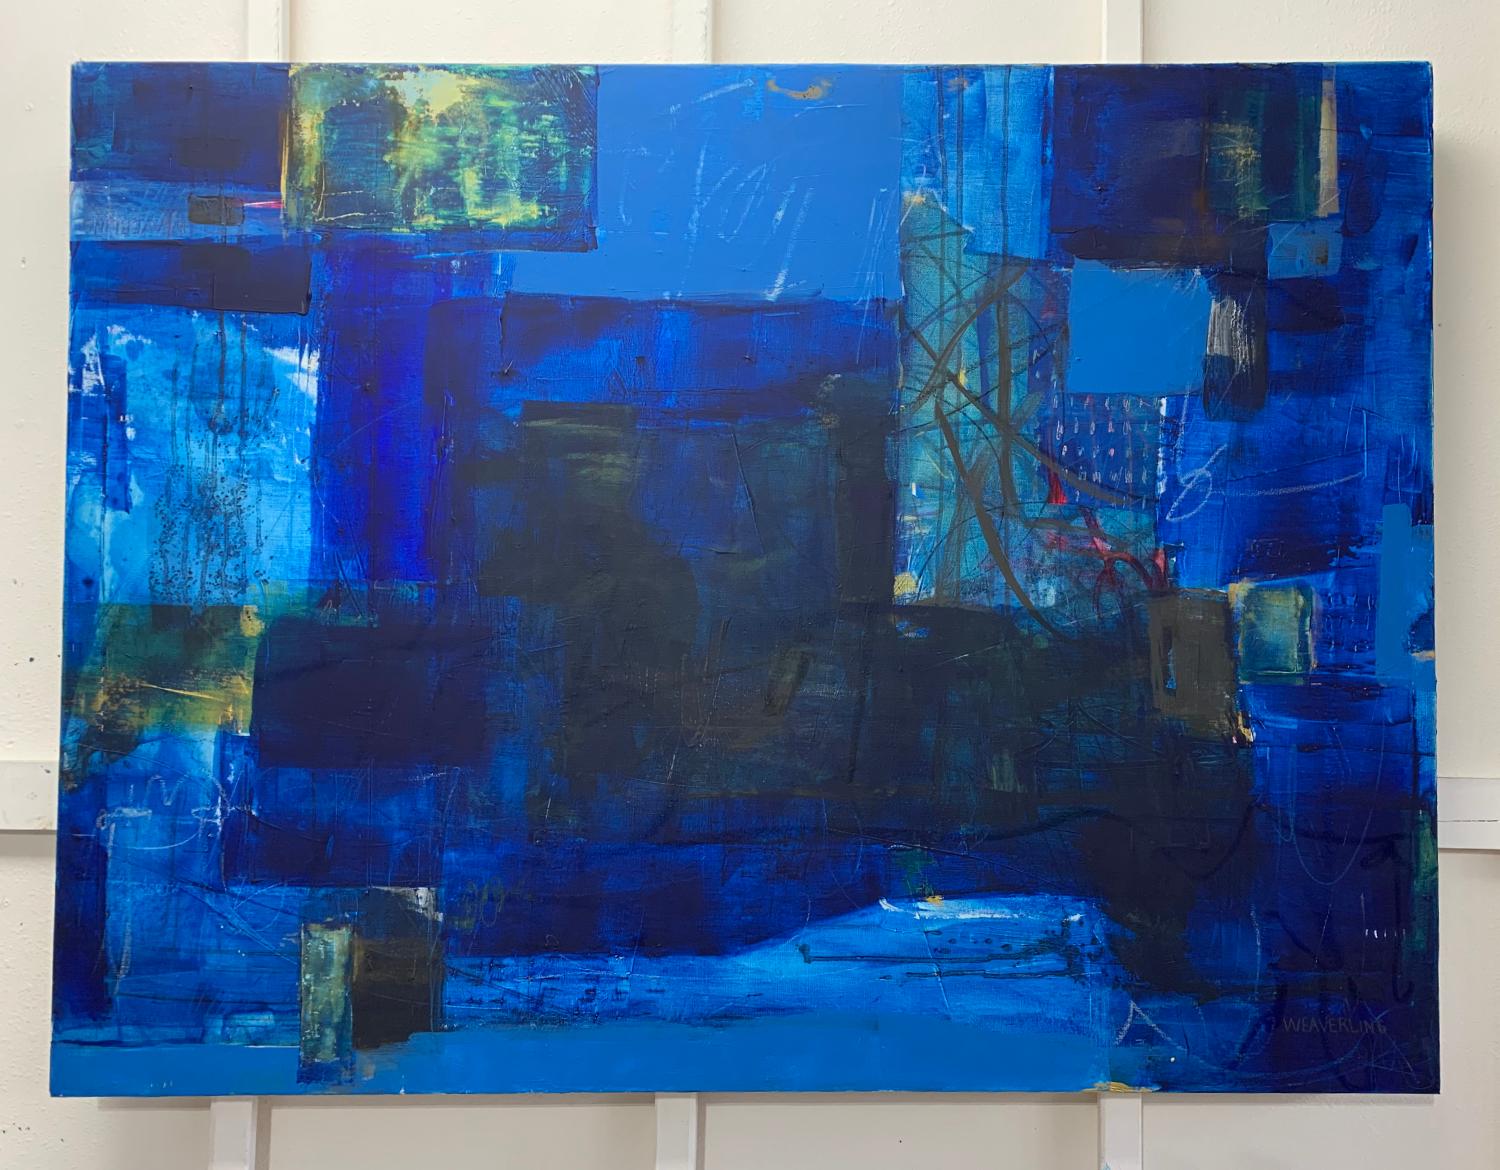 <p>Artist Comments<br>In a continuing exploration of artist Julie Weaverling's love of blue, she started this painting with experimentation and developed the modernist abstraction through many layers of work. 